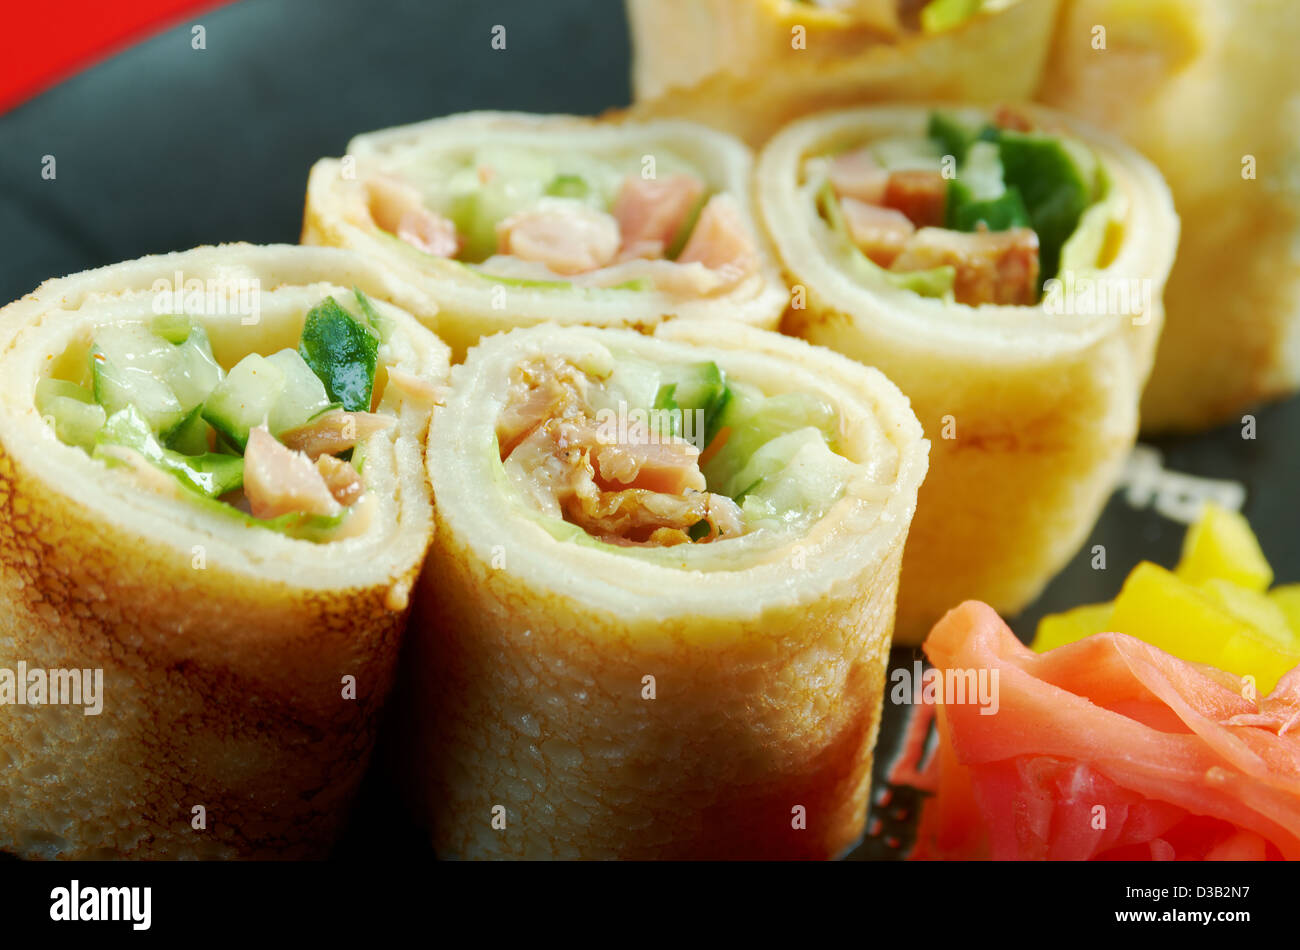 Chinese or Thai-style vegetable spring rolls  Stock Photo